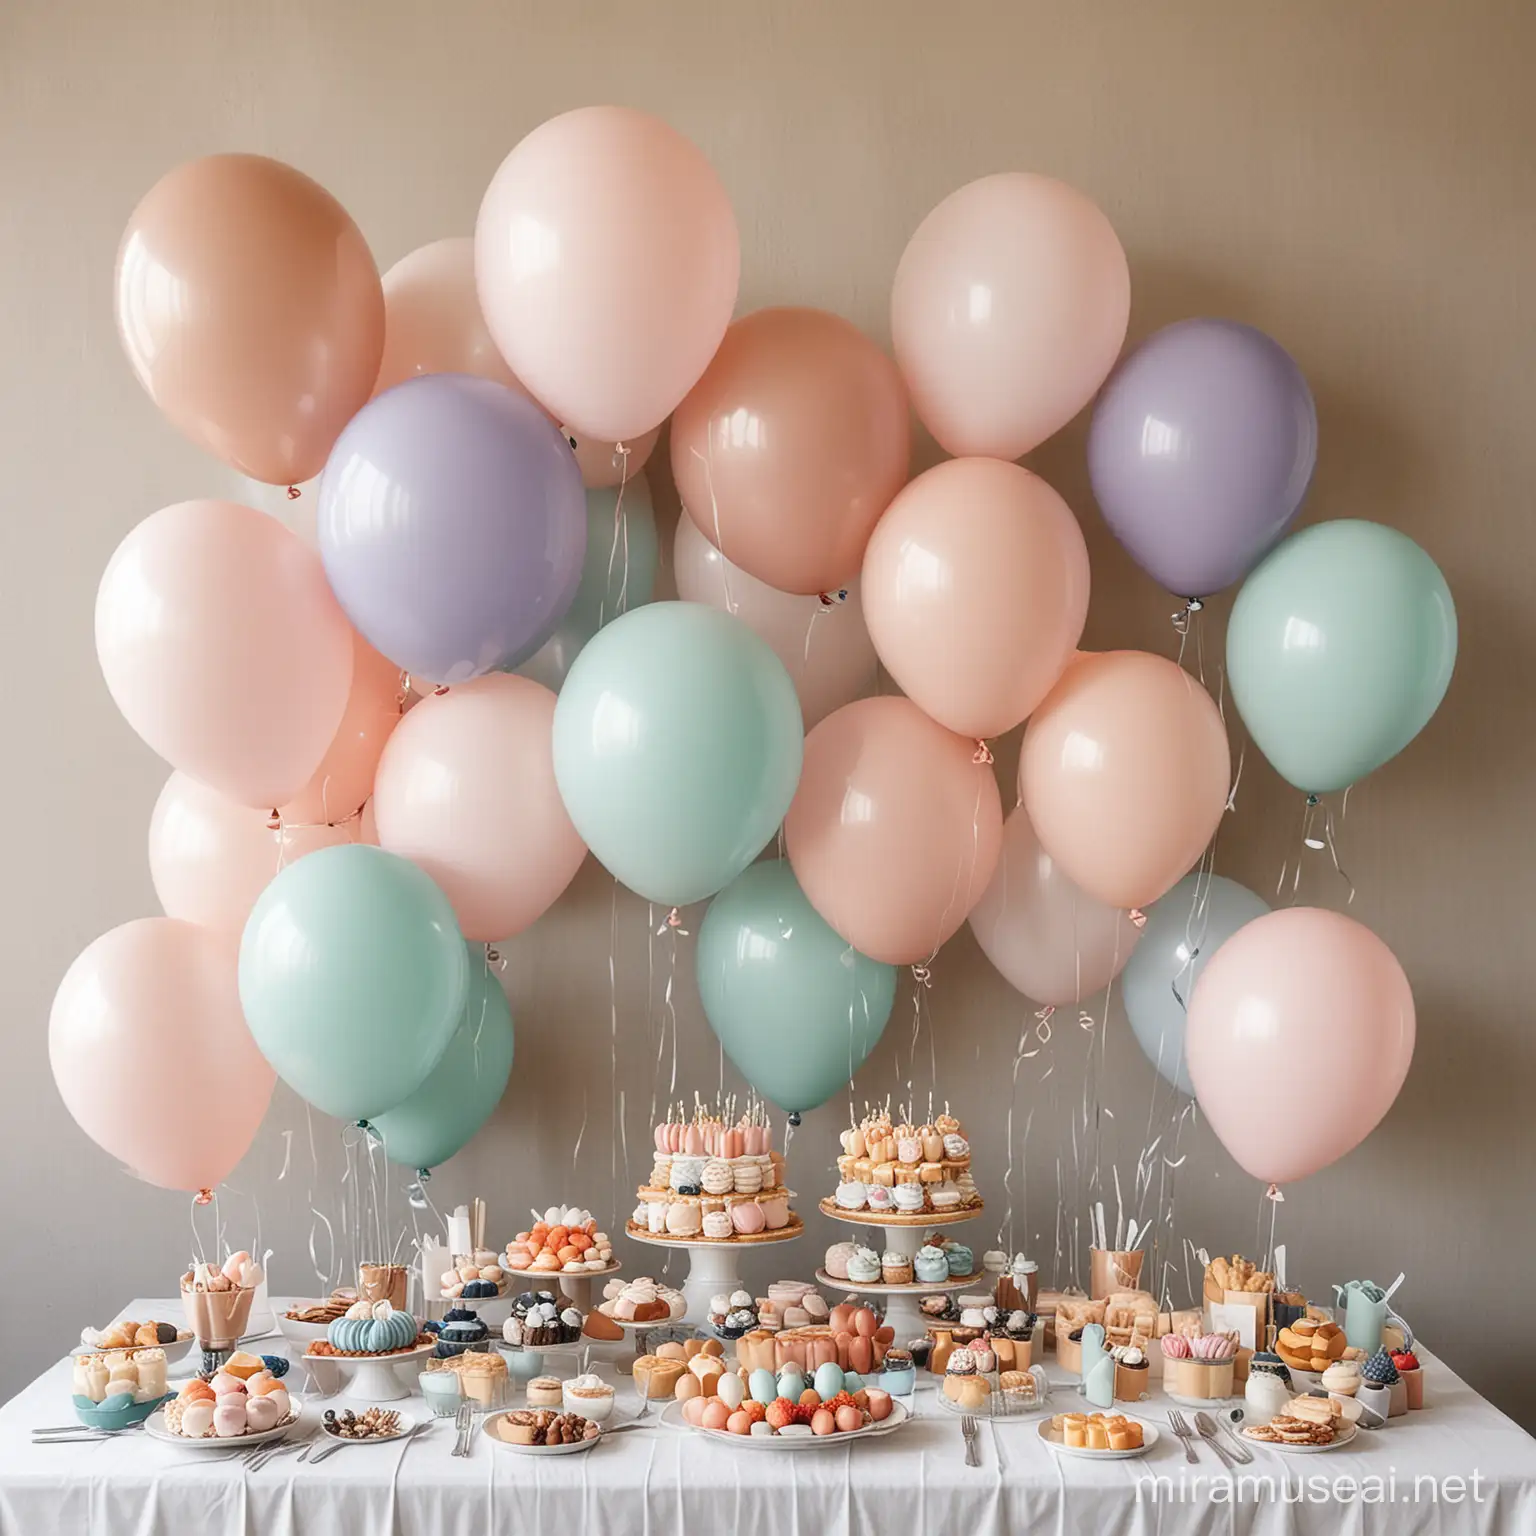 Joyful Balloon Party with a Comforting Color Palette